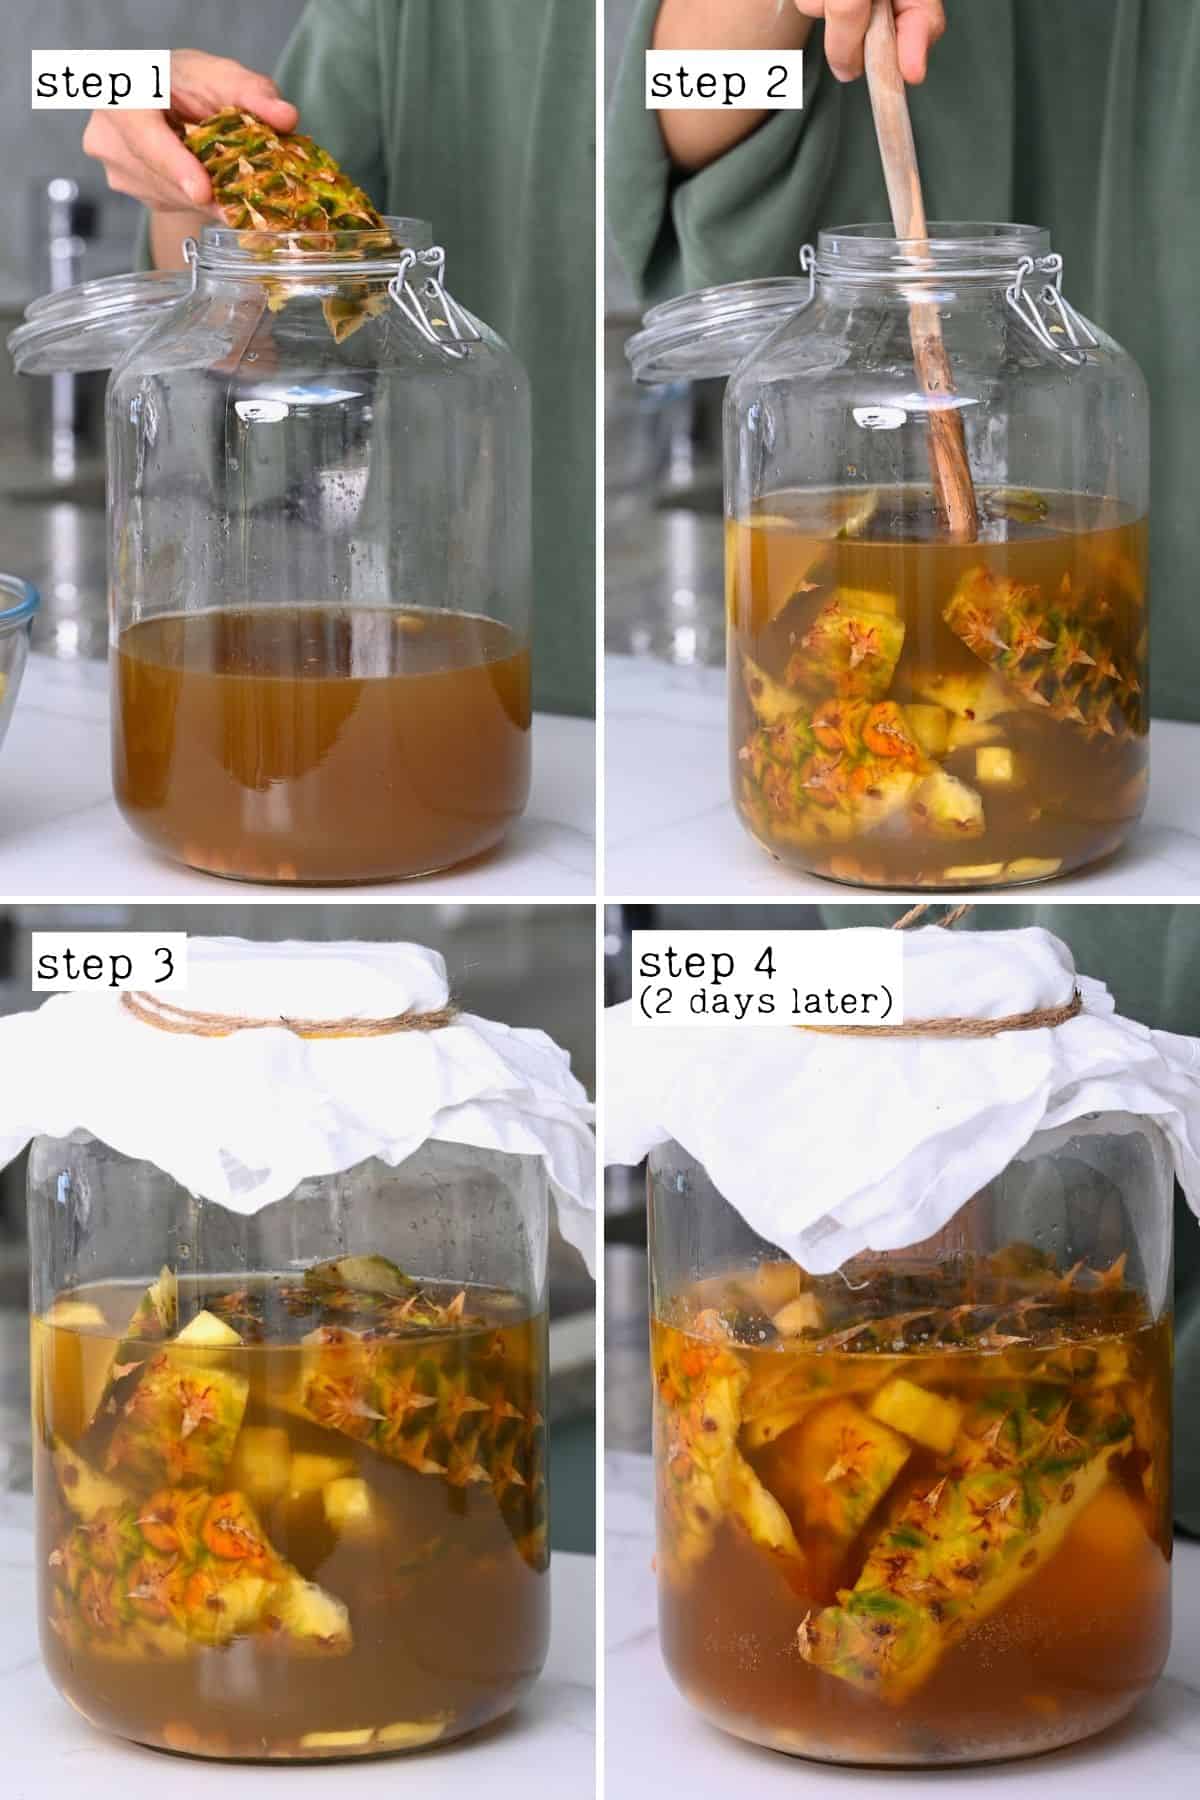 Steps for making tepache